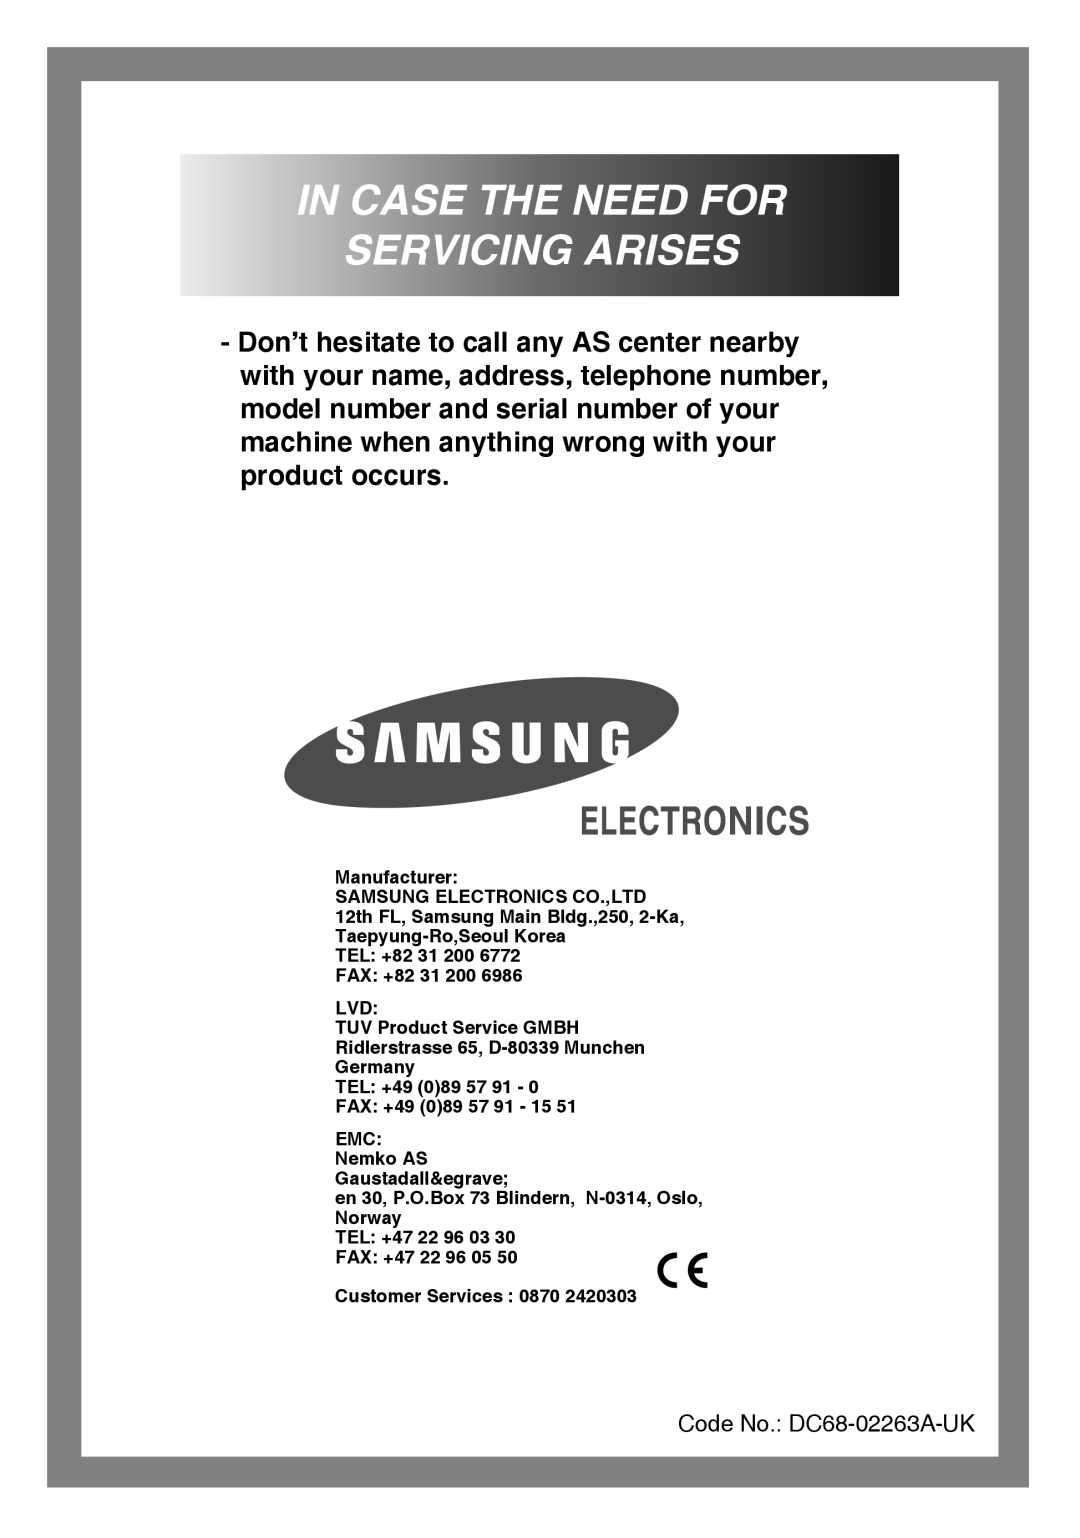 Samsung H1255AGS/XEG, H1255AGS/XEU, H1255AGS/XET manual In Case The Need For Servicing Arises, Code No. DC68-02263A-UK 